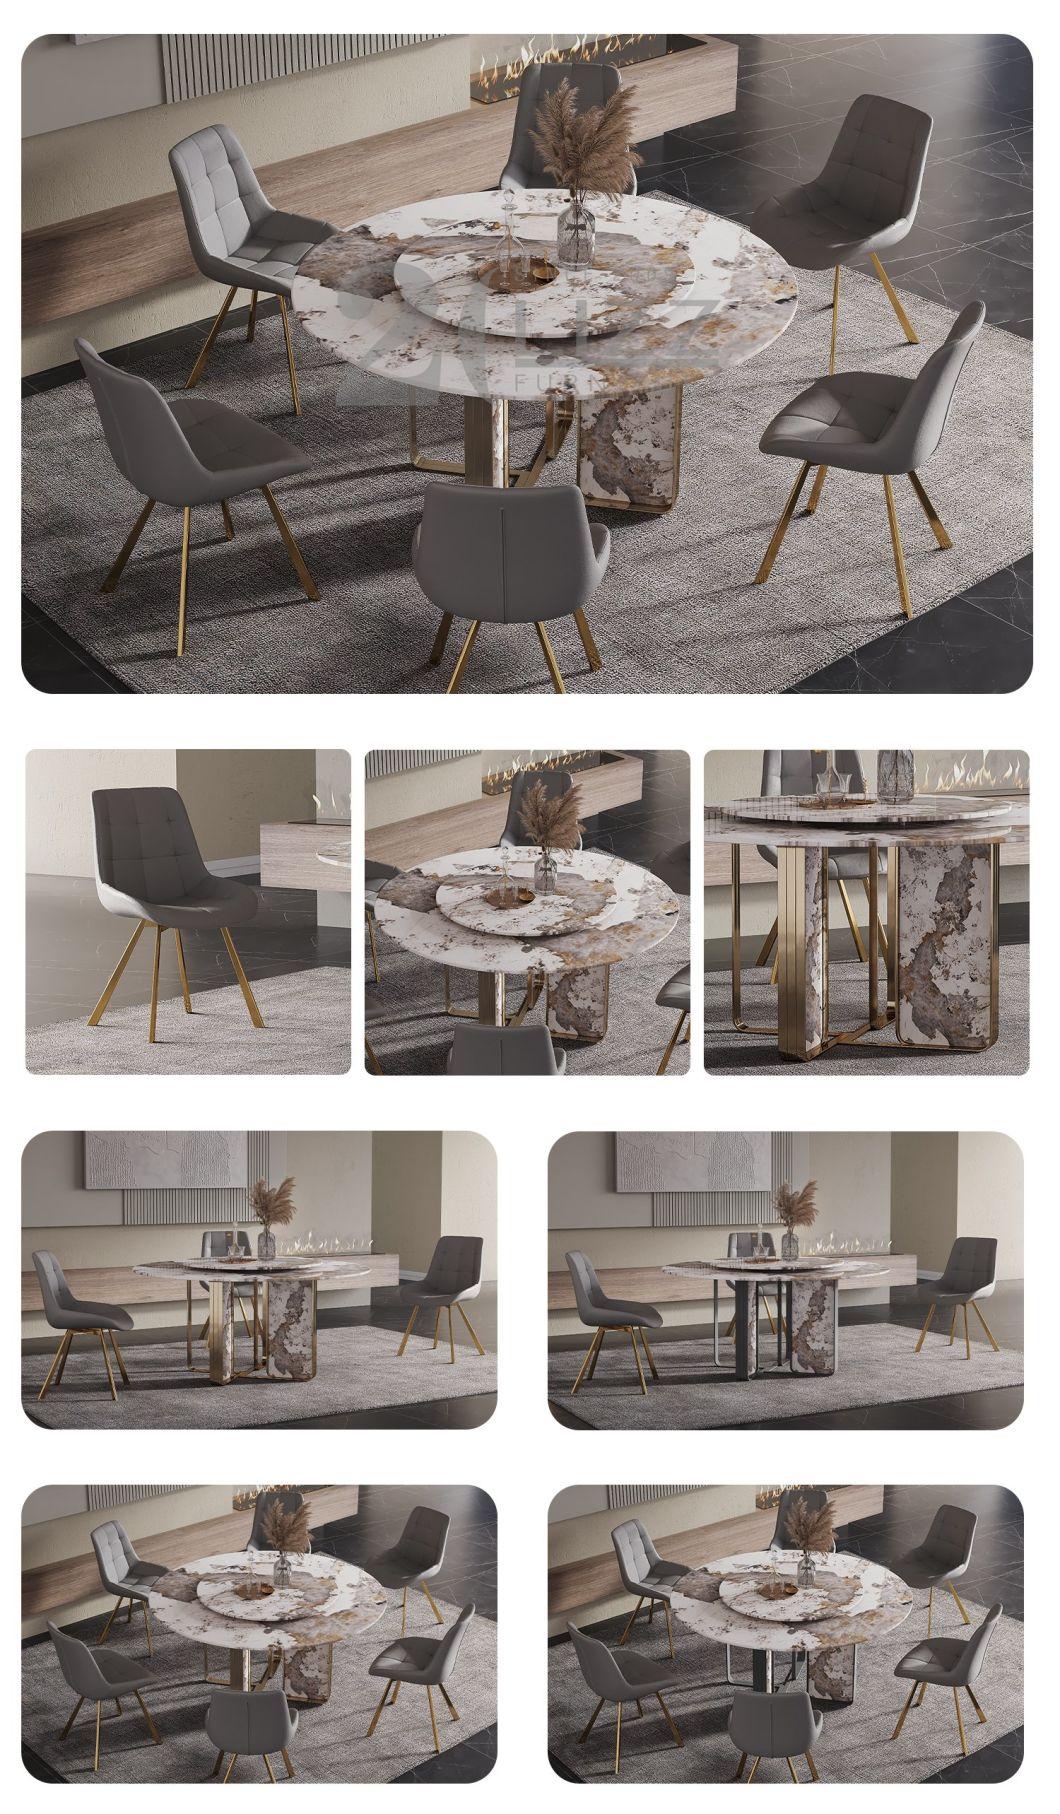 Italian Design European Luxury Round Dining Table Set with 6 Chairs